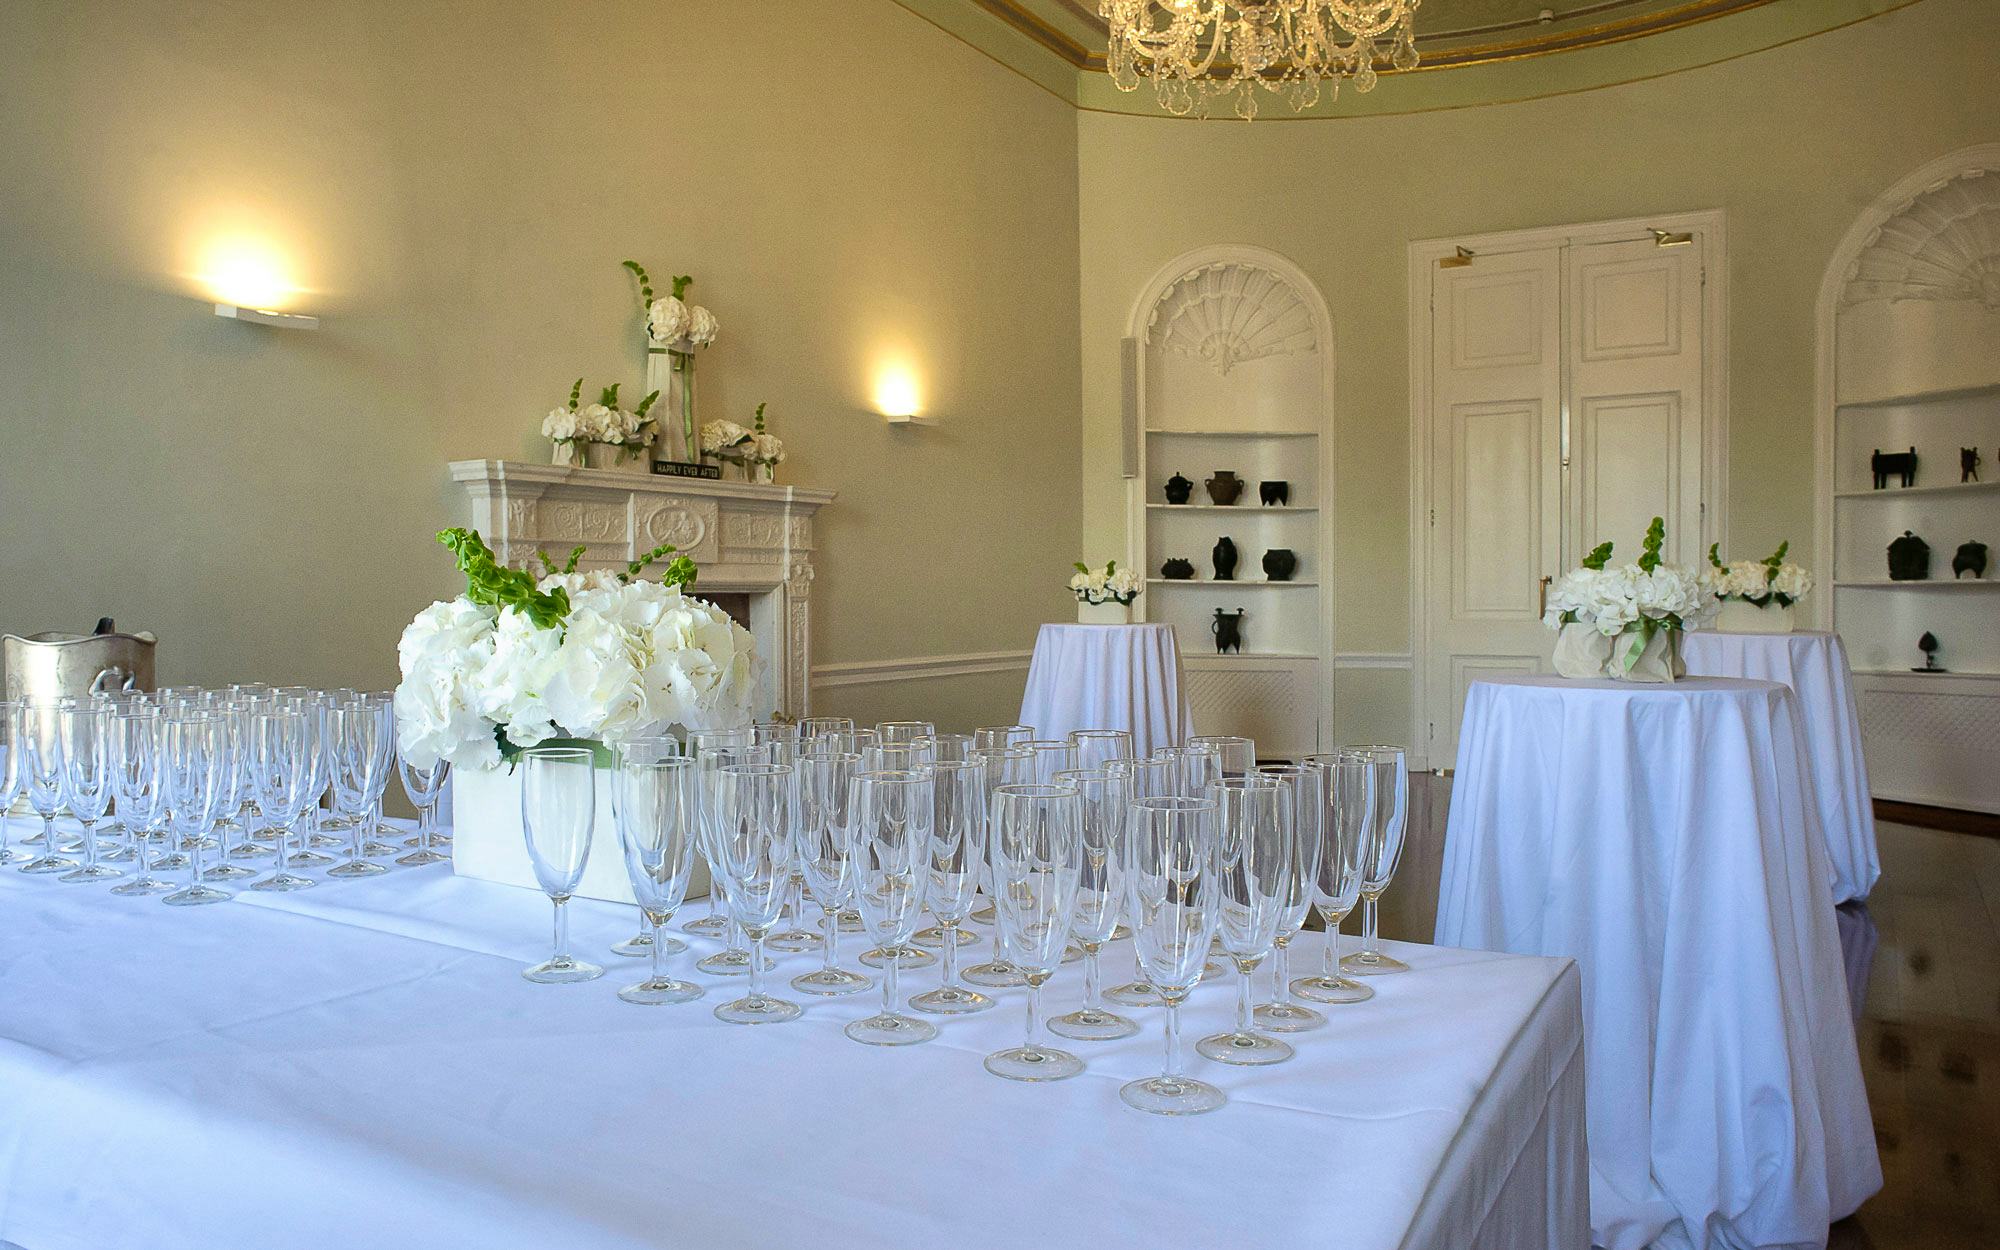 Asia House fine room events drinks reception dinner private hire 